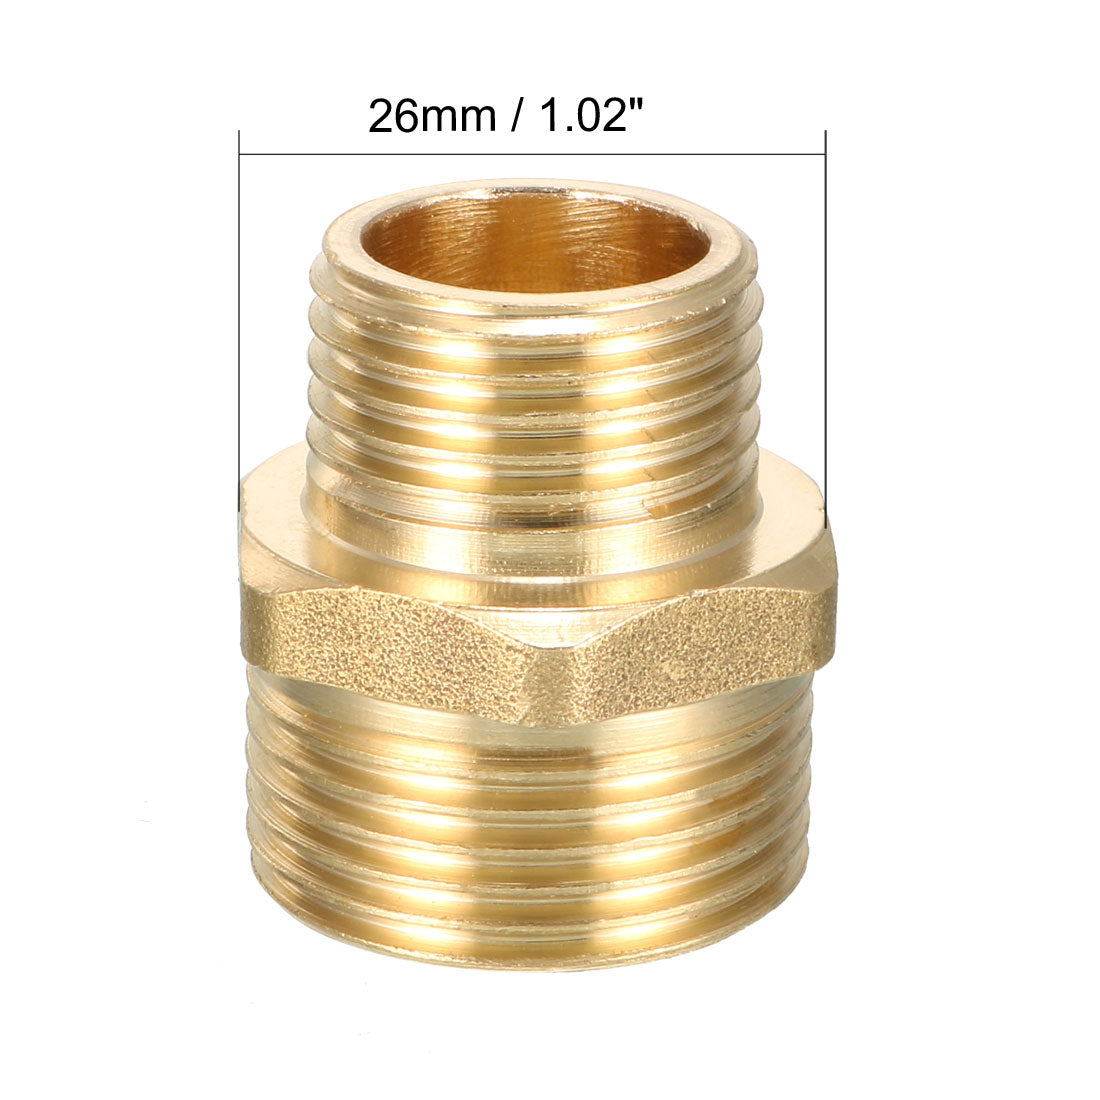 uxcell Uxcell Brass Pipe Fitting Reducing Hex Bushing 3/4 BSP Male x 1/2 BSP Male Adapter